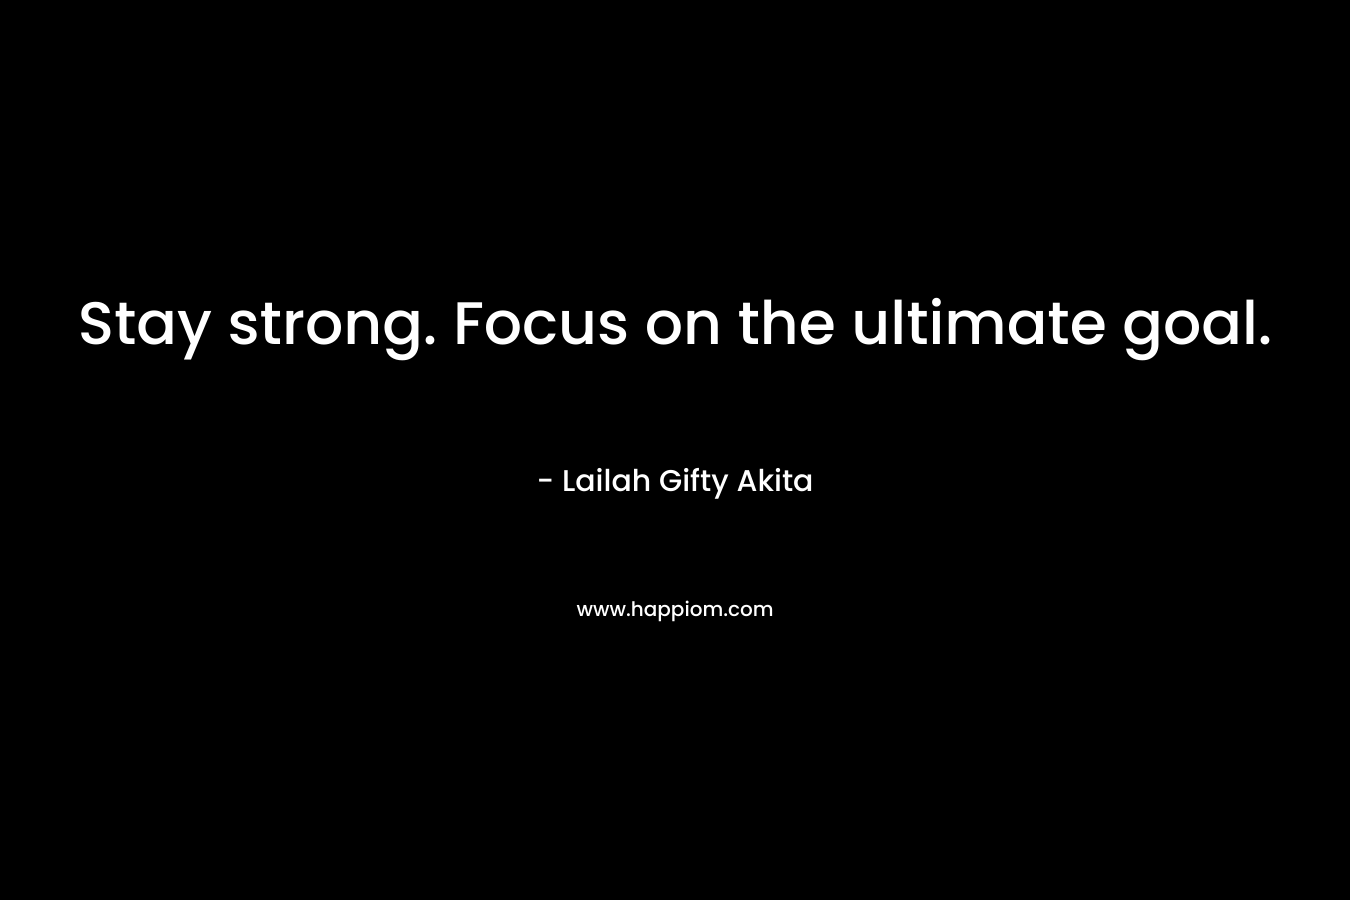 Stay strong. Focus on the ultimate goal.